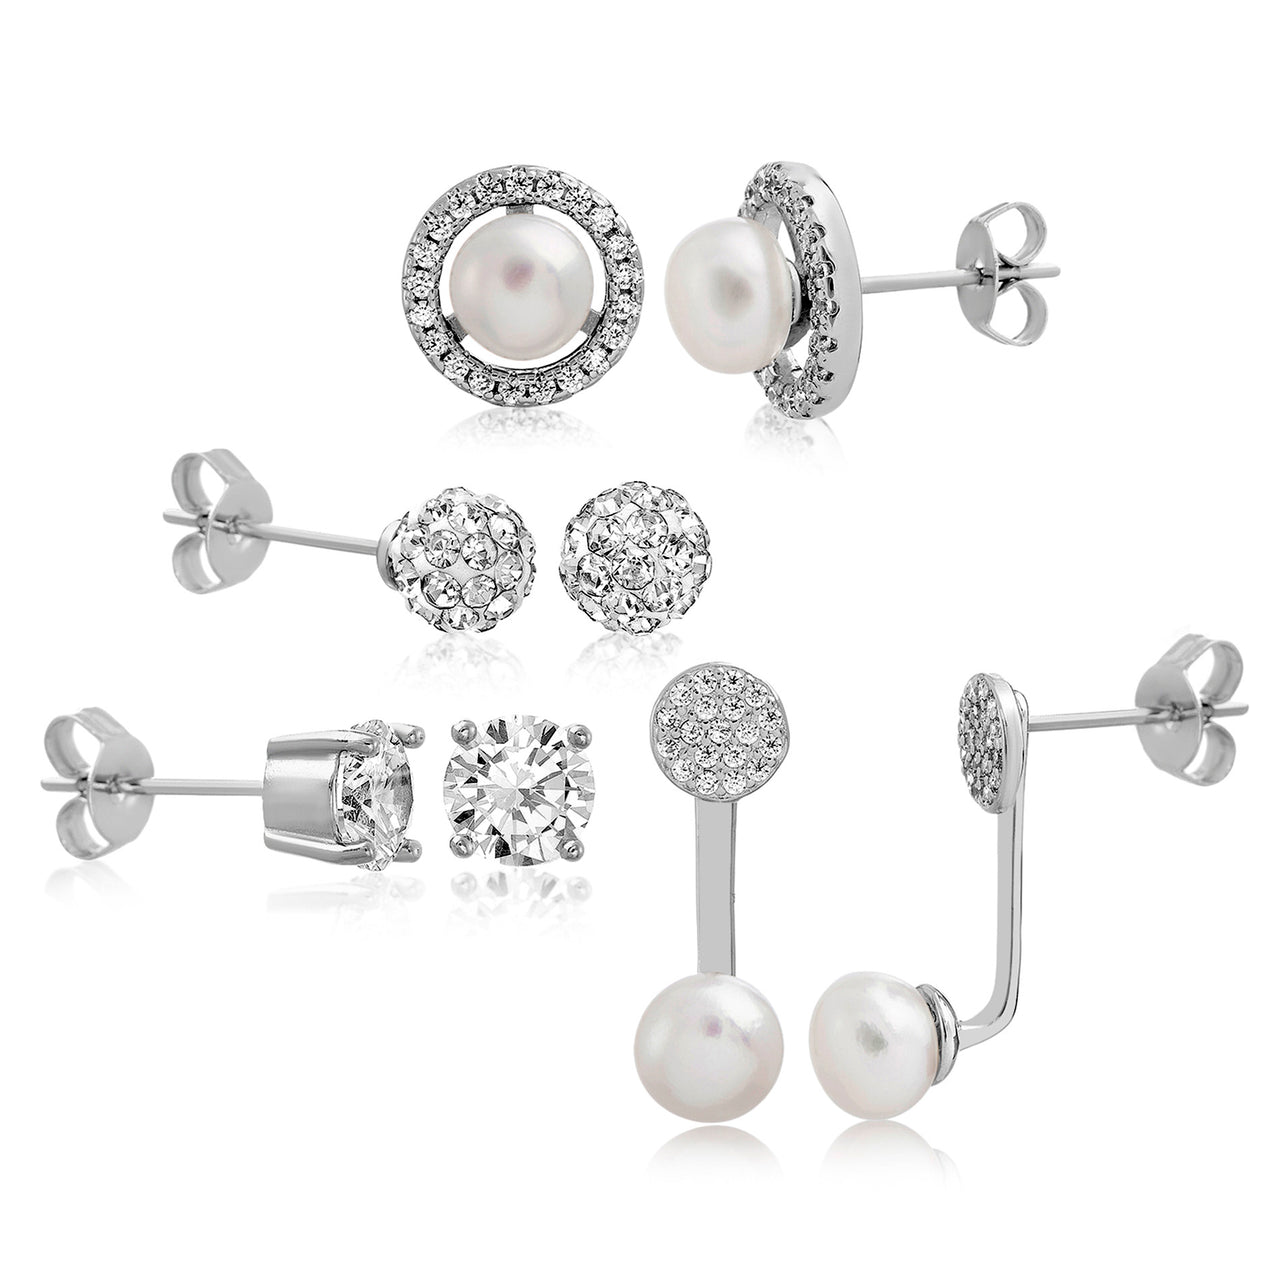 Aubrey Lee Cubic Zirconia and Simulated Pearl Ball Front To Back Stud and Jacket 4 Piece Earring Set in Rhodium Plated Brass